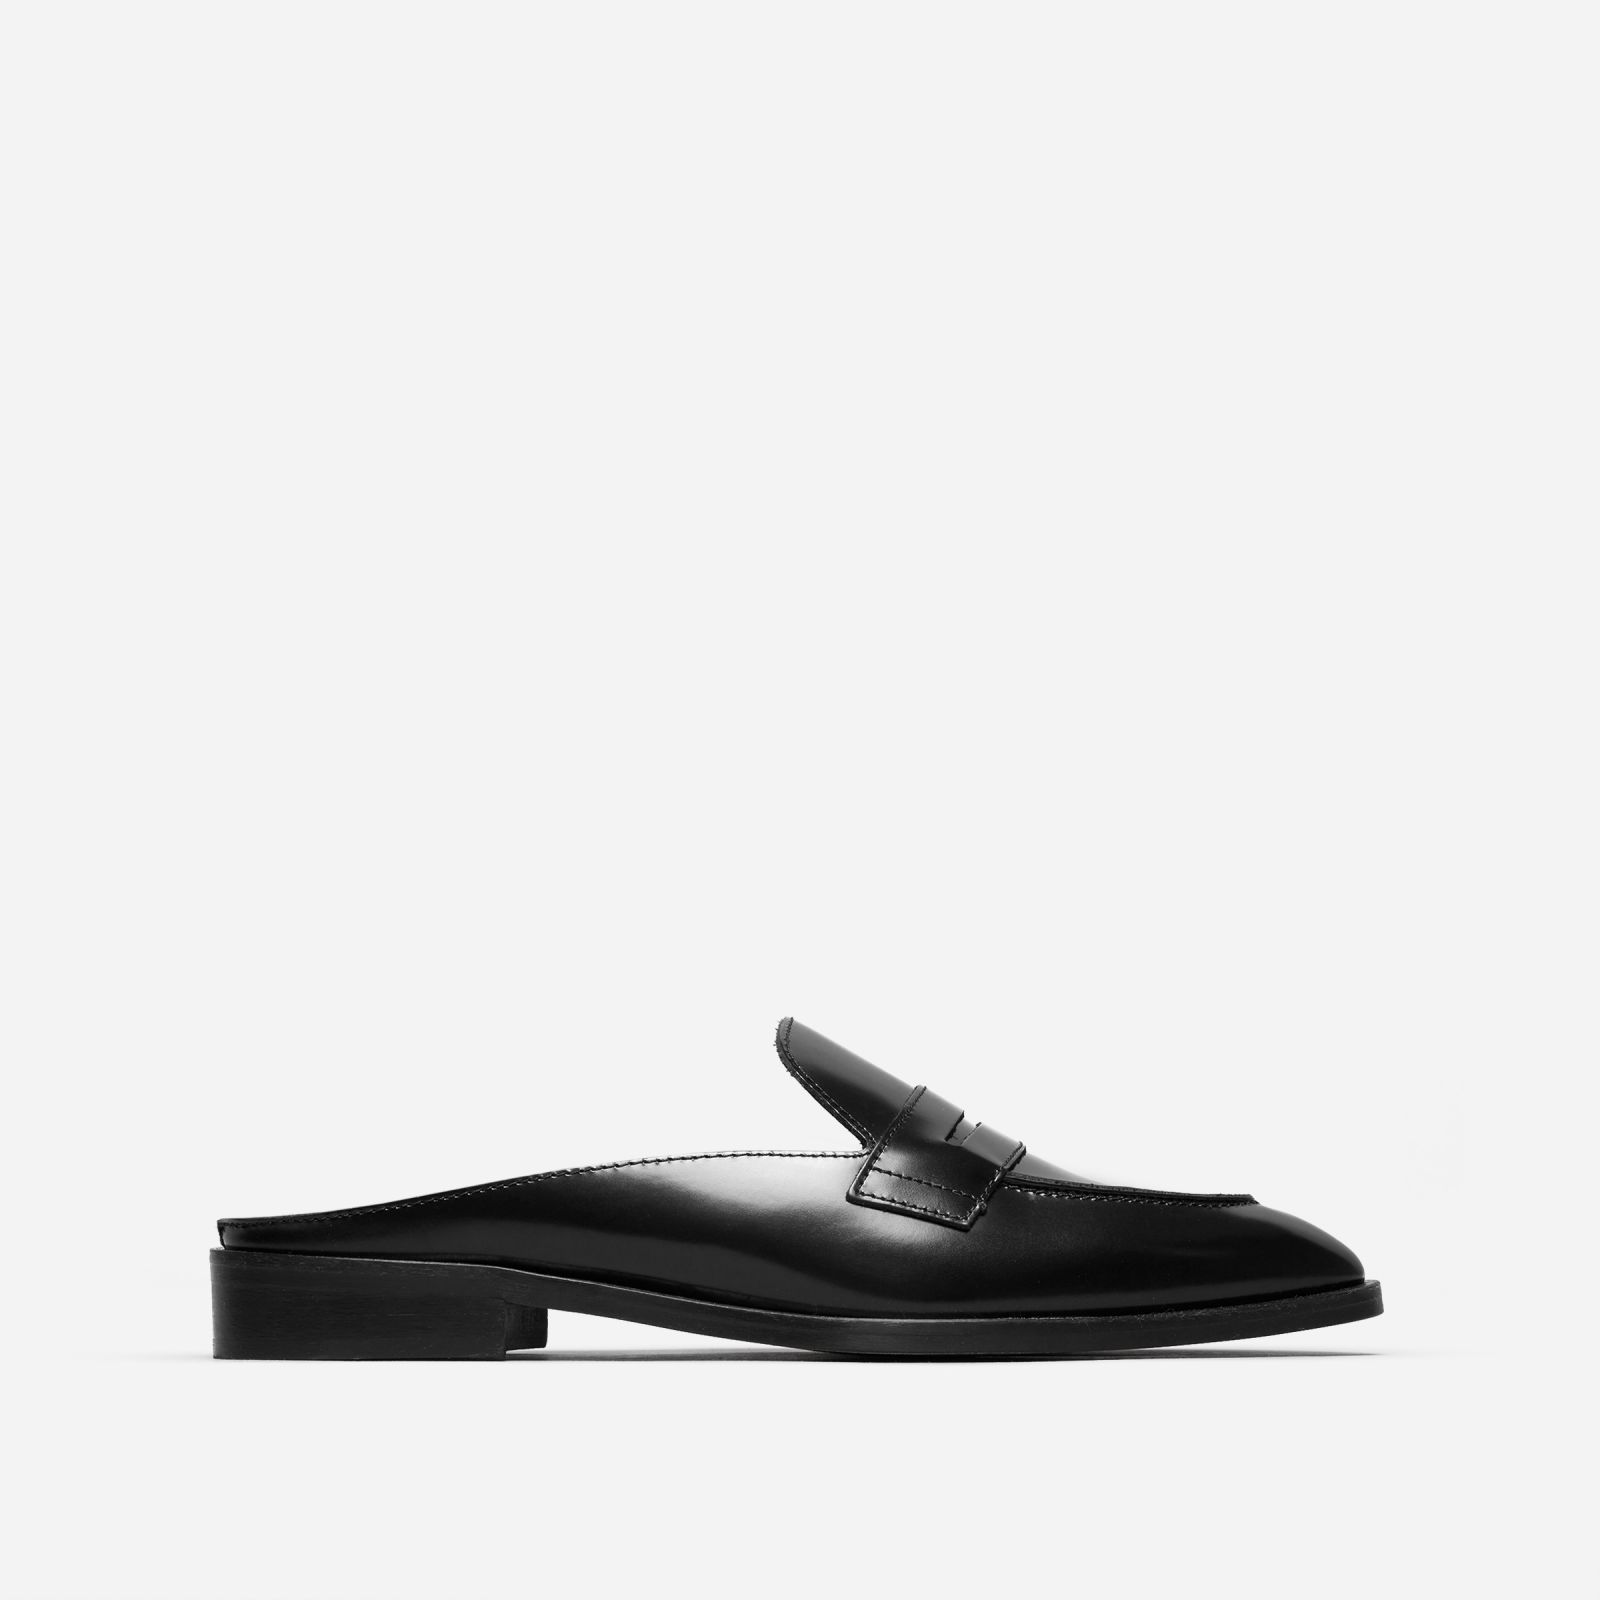 Women's Penny Loafers Mule by Everlane in Black, Size 5 | Everlane